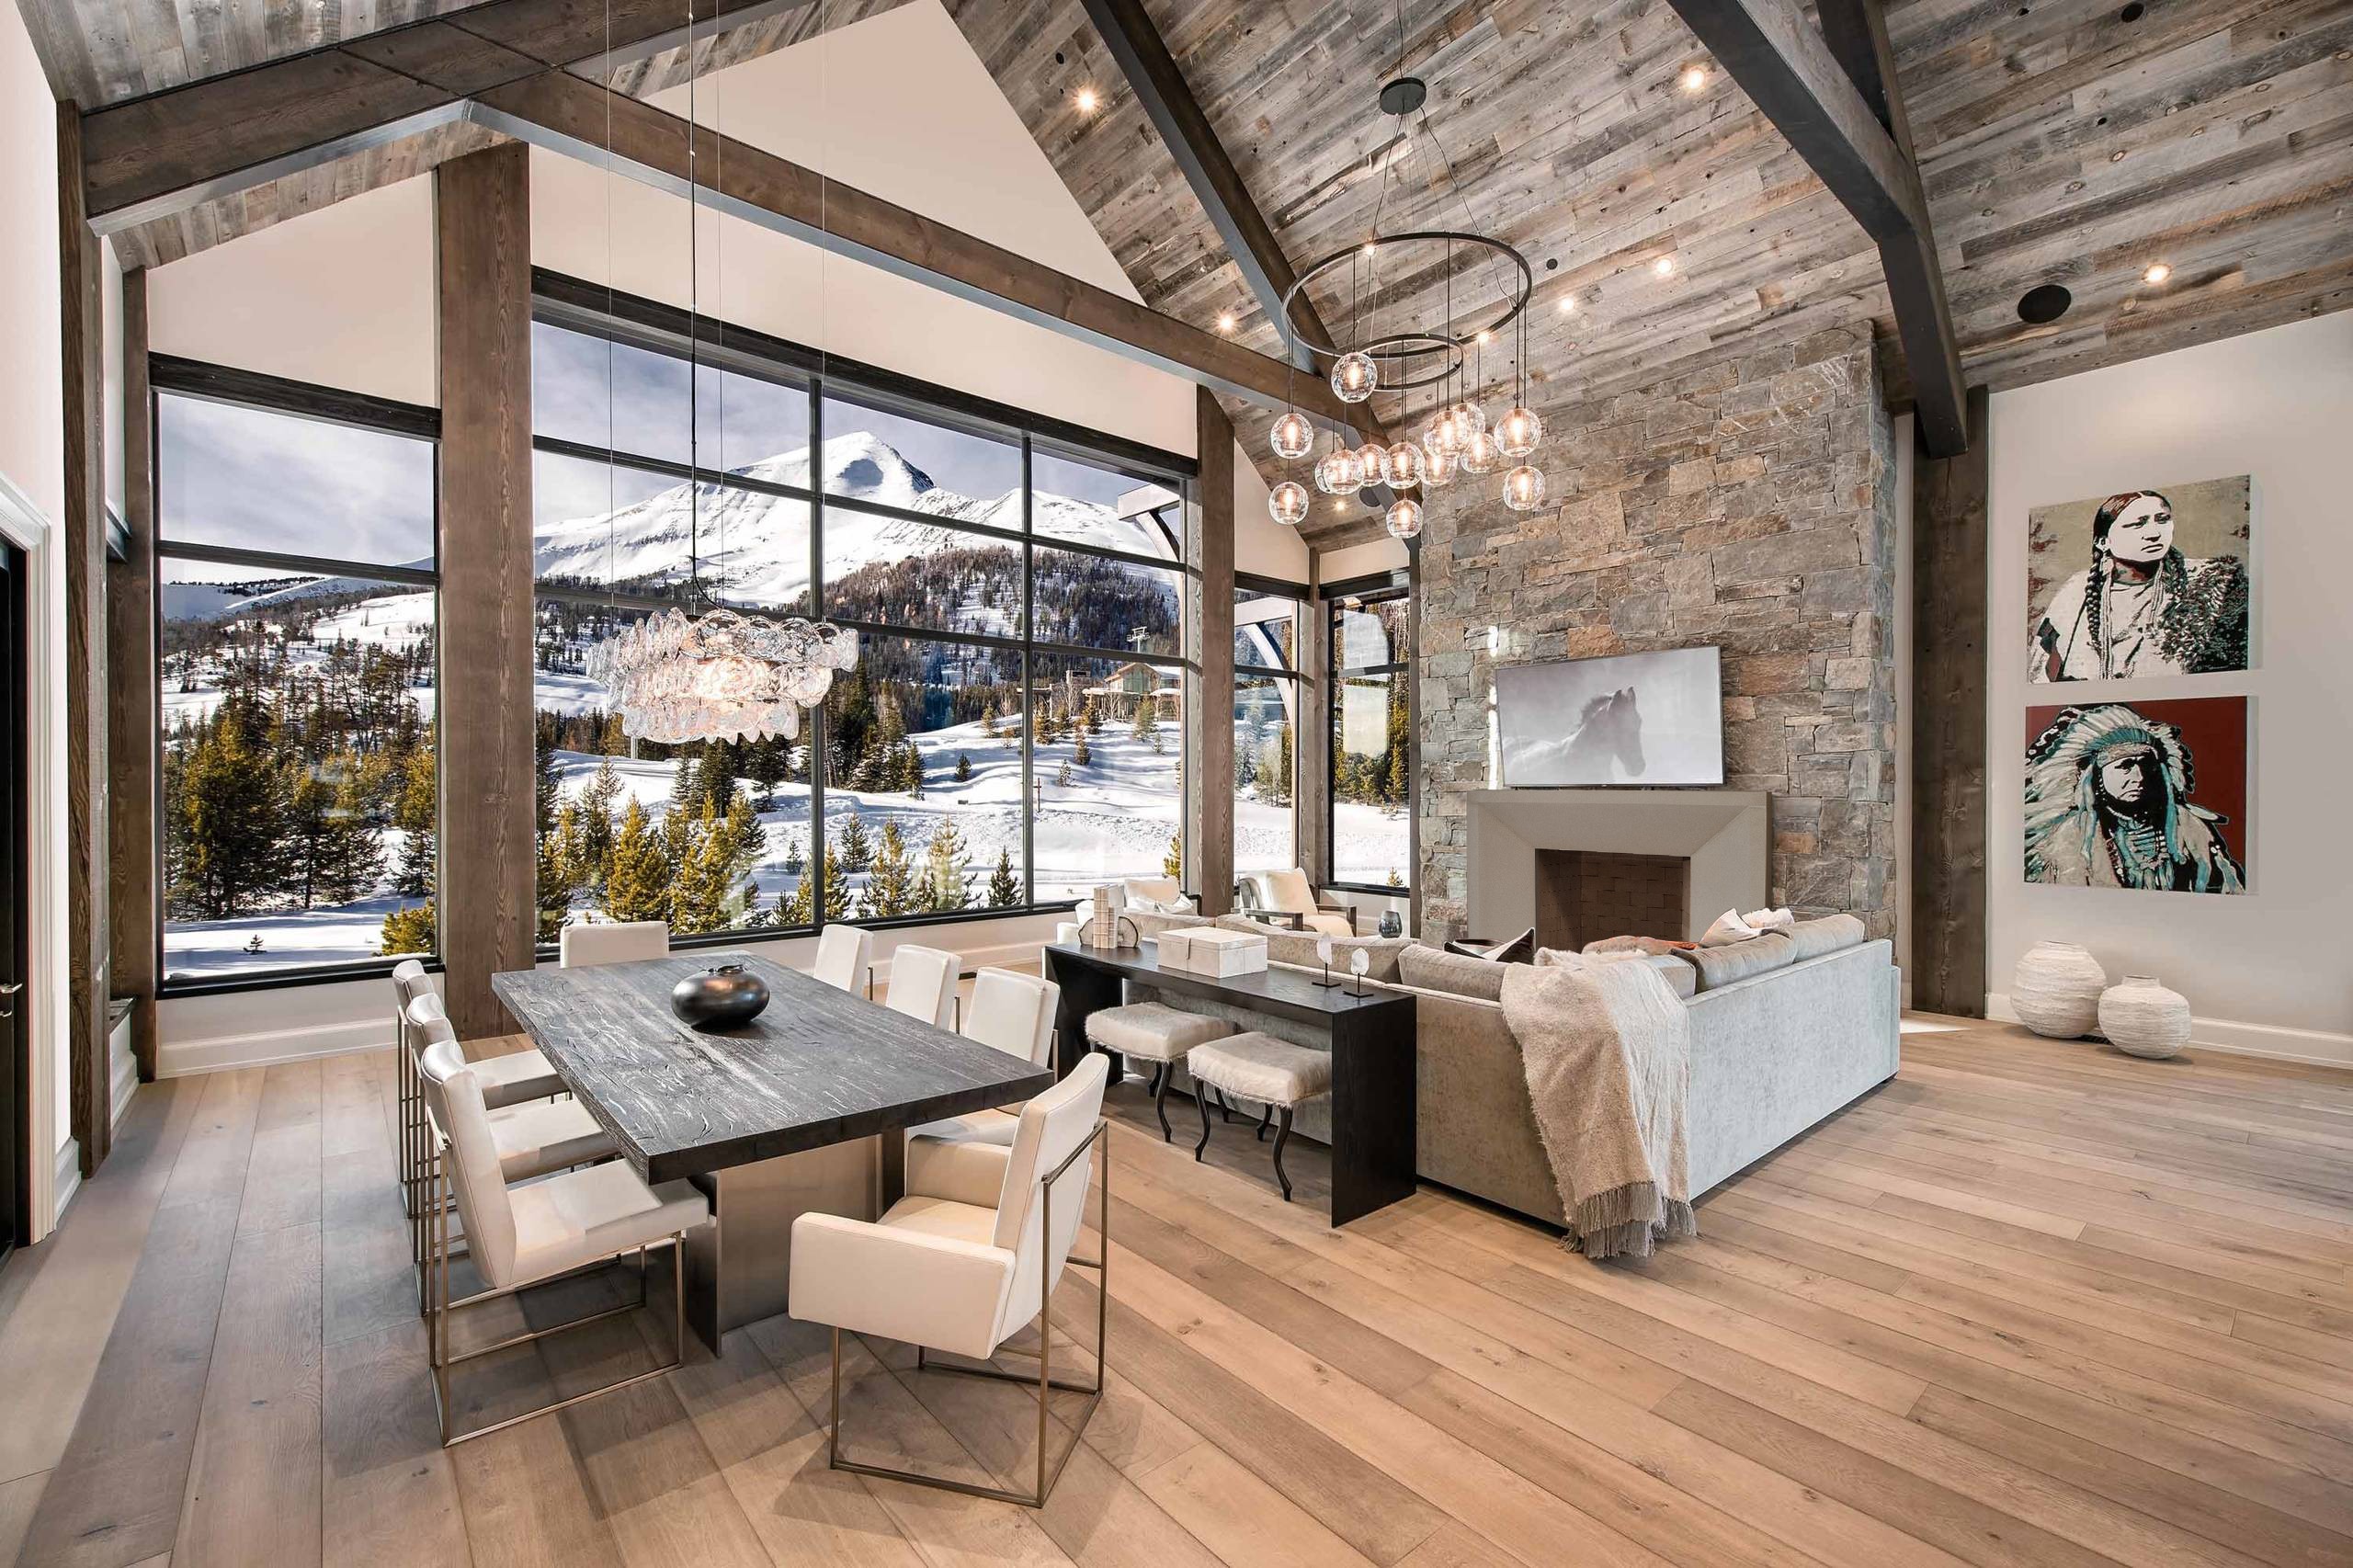 A large living room with wood beams, a mantel and a view of the mountains.